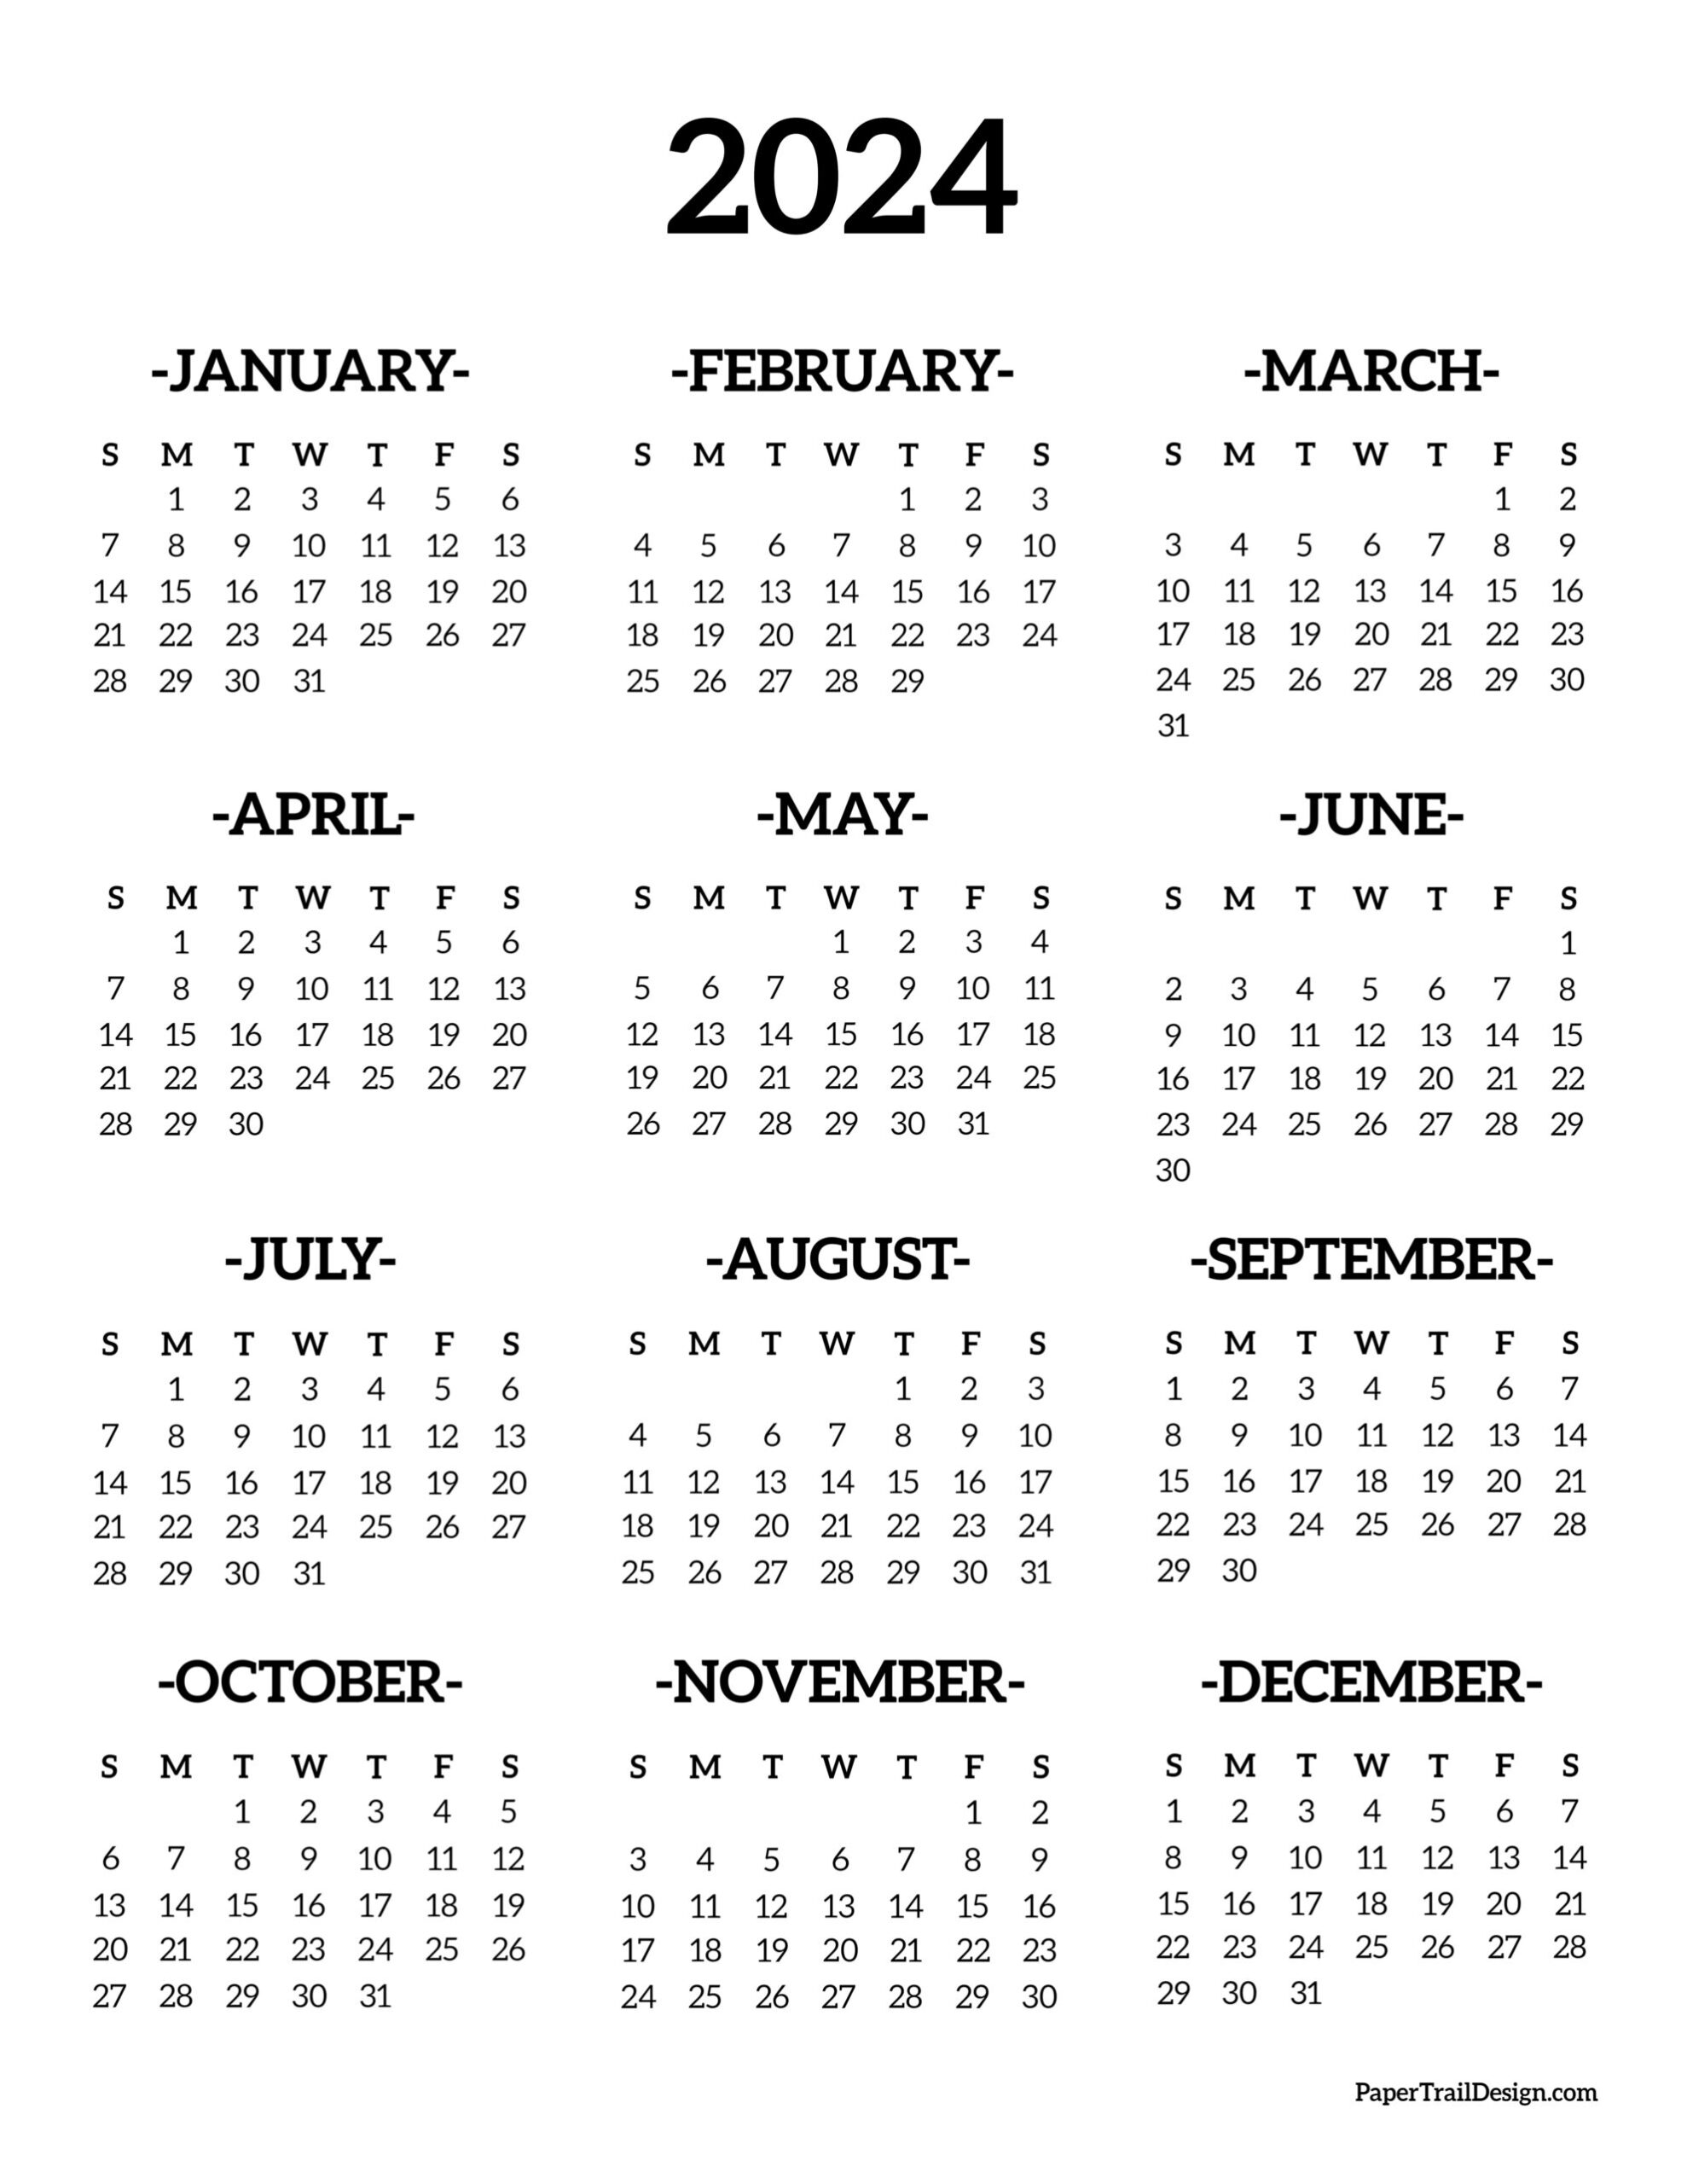 Calendar 2024 Printable One Page - Paper Trail Design for 2024 Free Printable Year Calendar